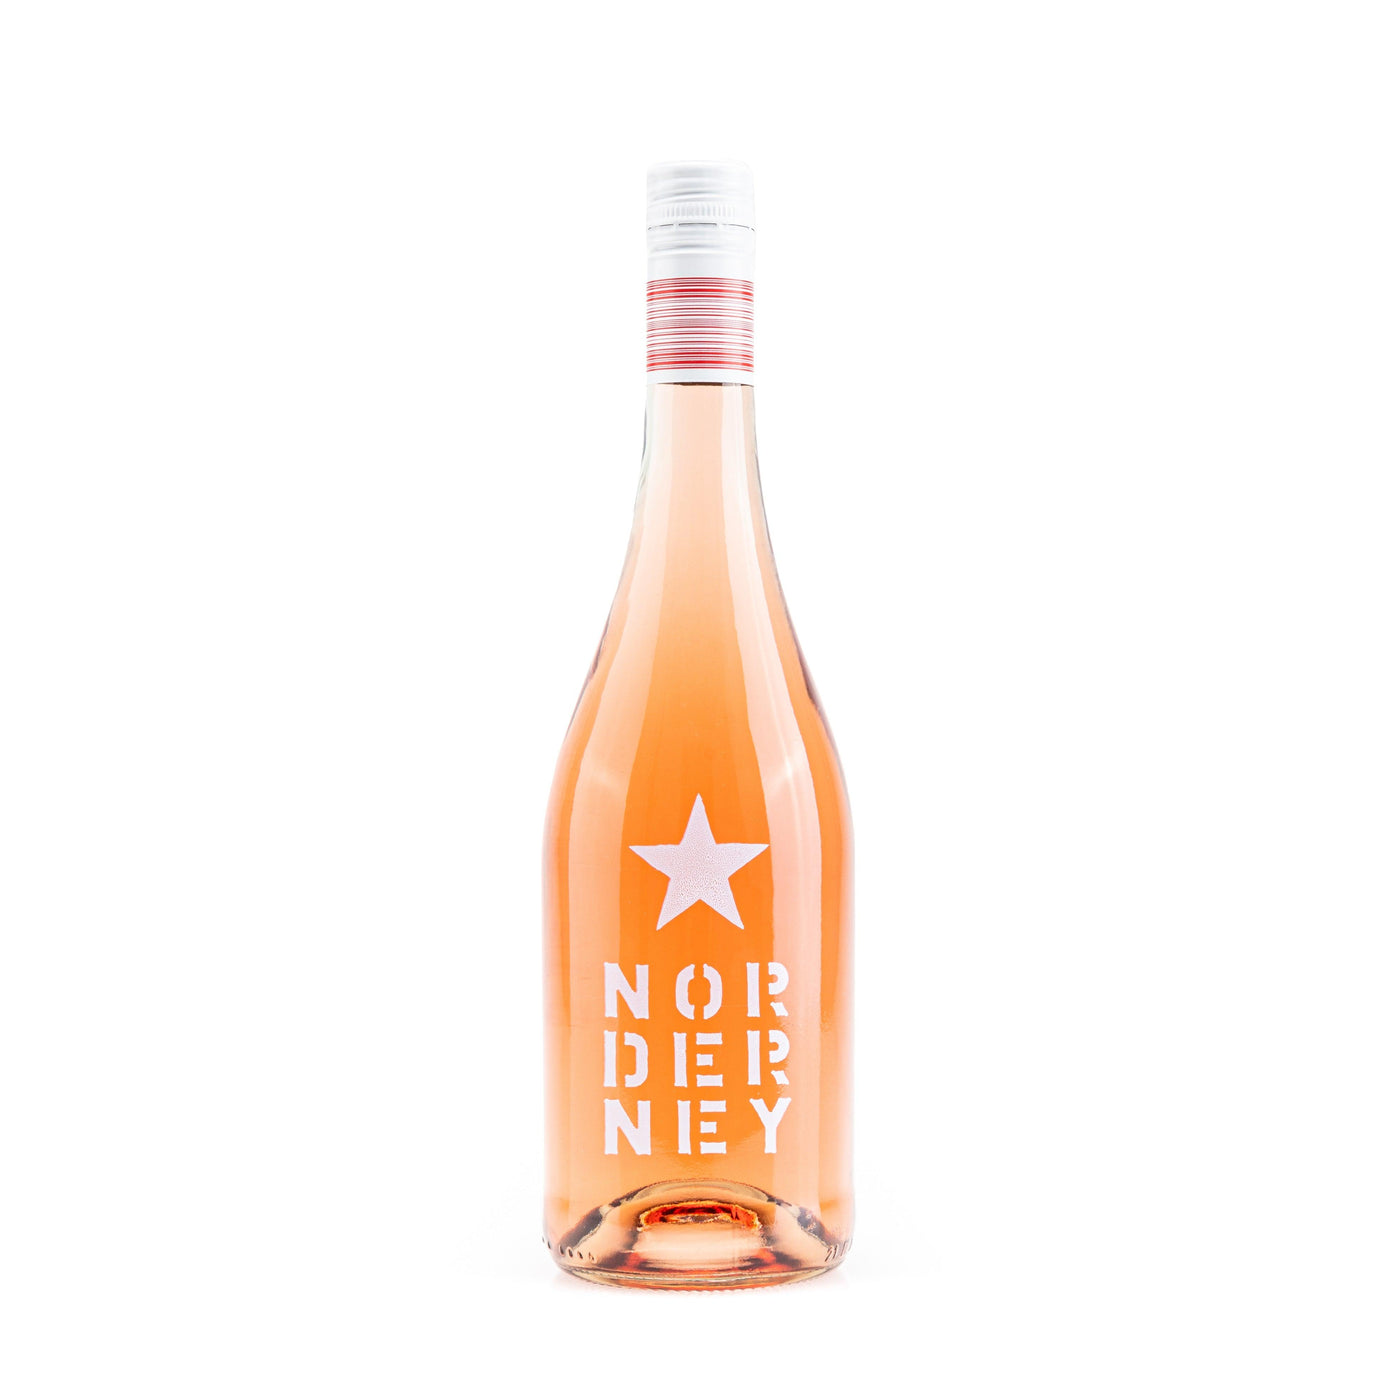 Norderney Edition Rosé Pinot Noir - NRDNY